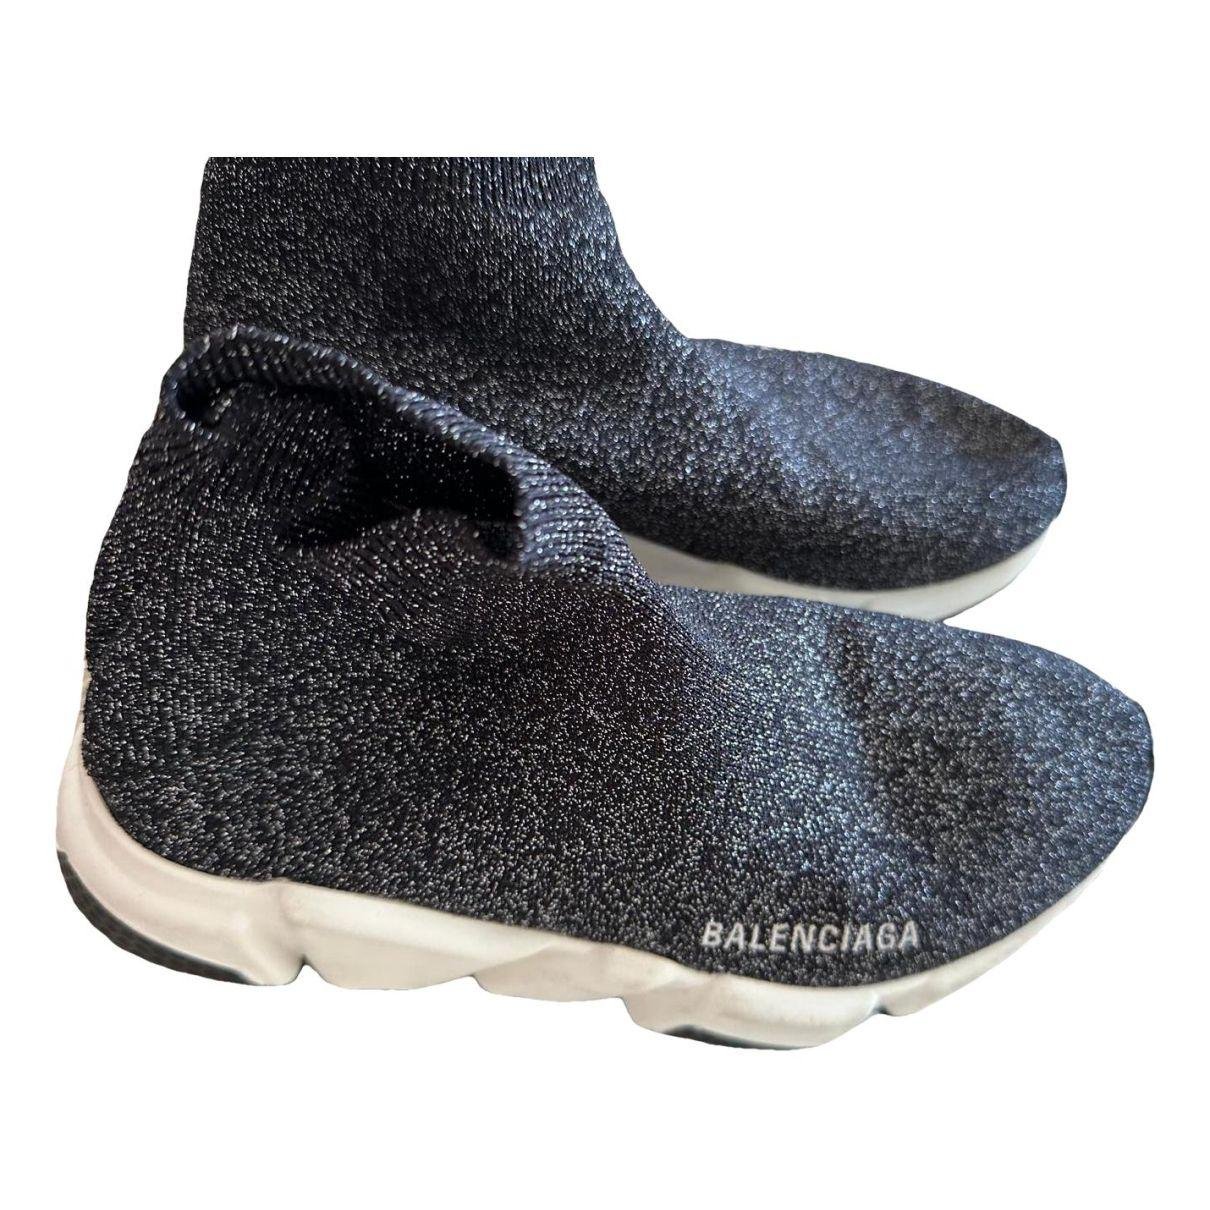 Speed glitter trainers by BALENCIAGA